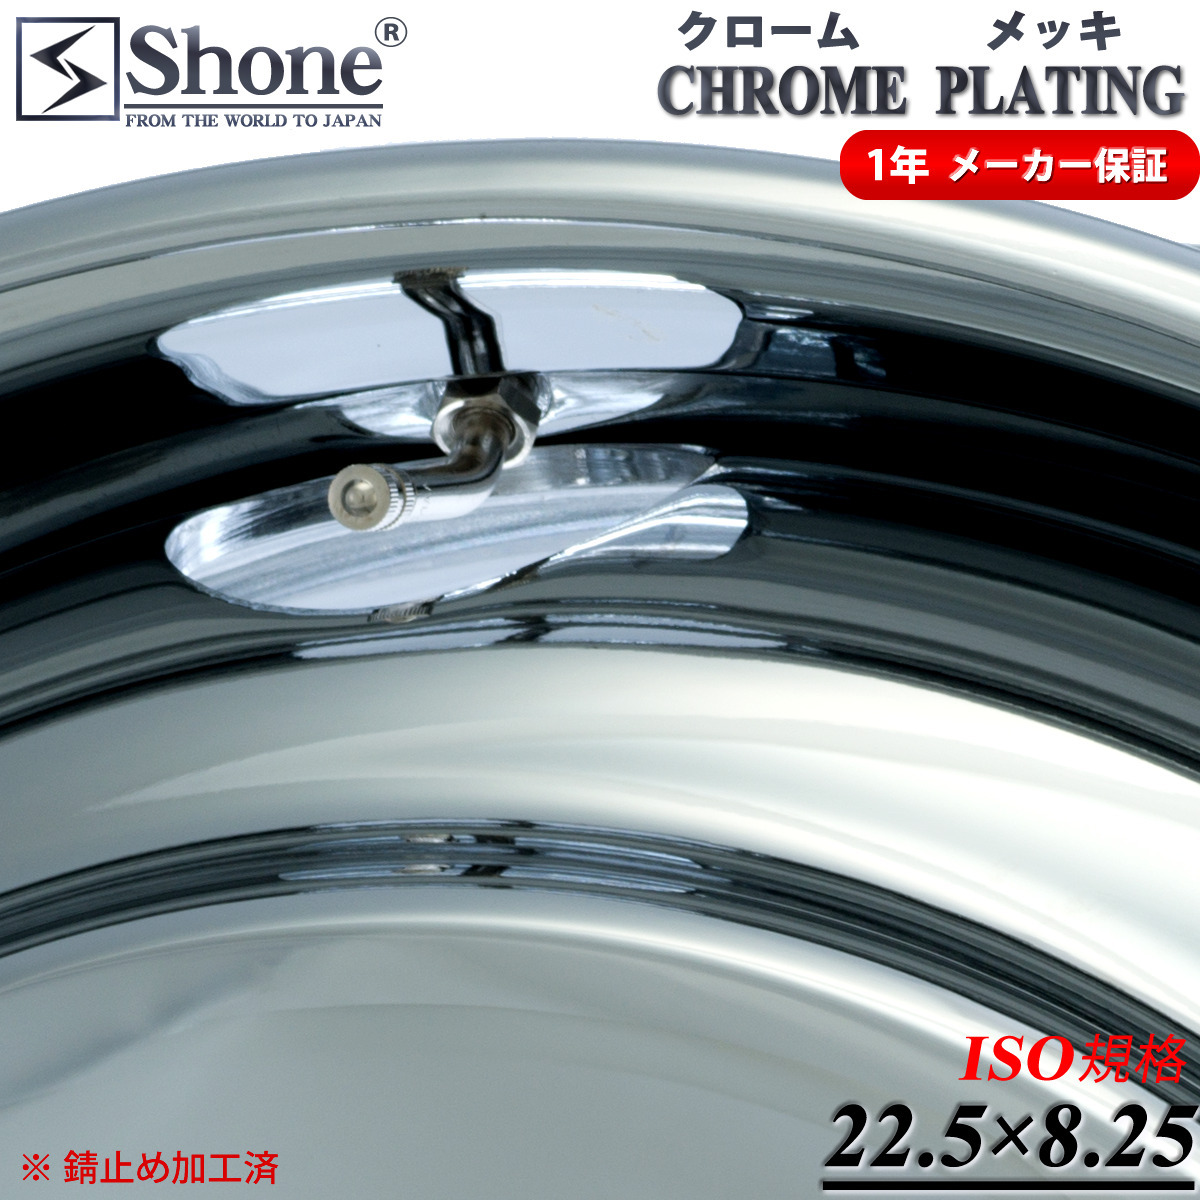  front . for new goods 2 ps price company addressed to free shipping 22.5×8.25 10 hole ISO standard SHONE Chrome plating wheel truck iron large raised-floor 1 year with guarantee NO,SH328